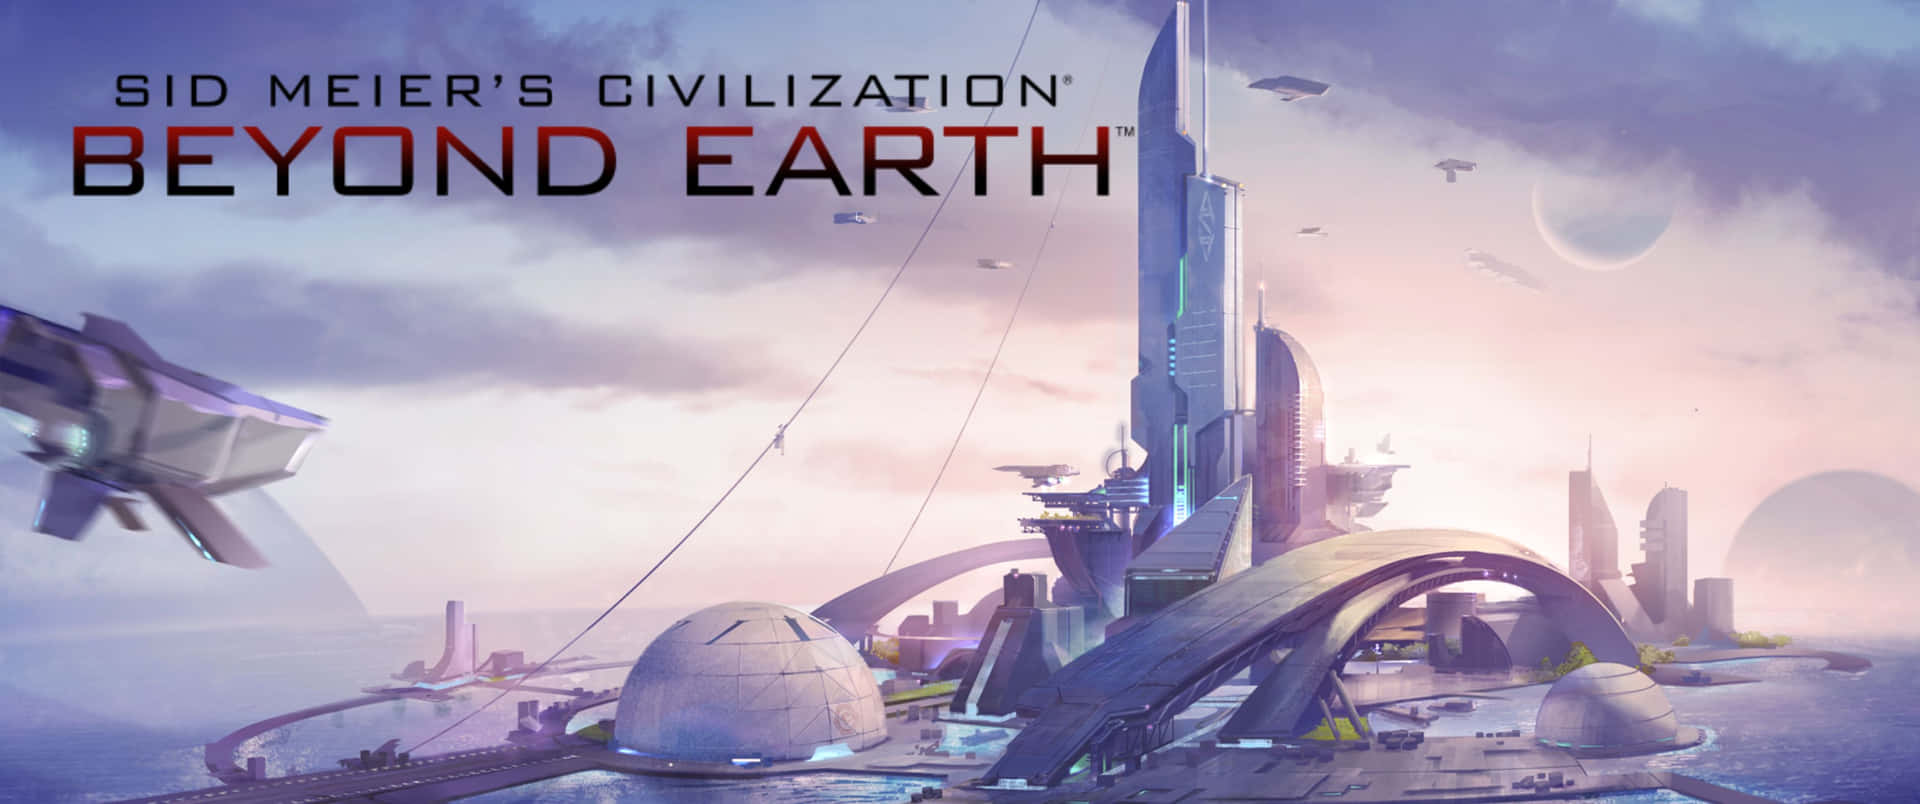 Technological Structures 3440x1440p Civilization Beyond Earth Background